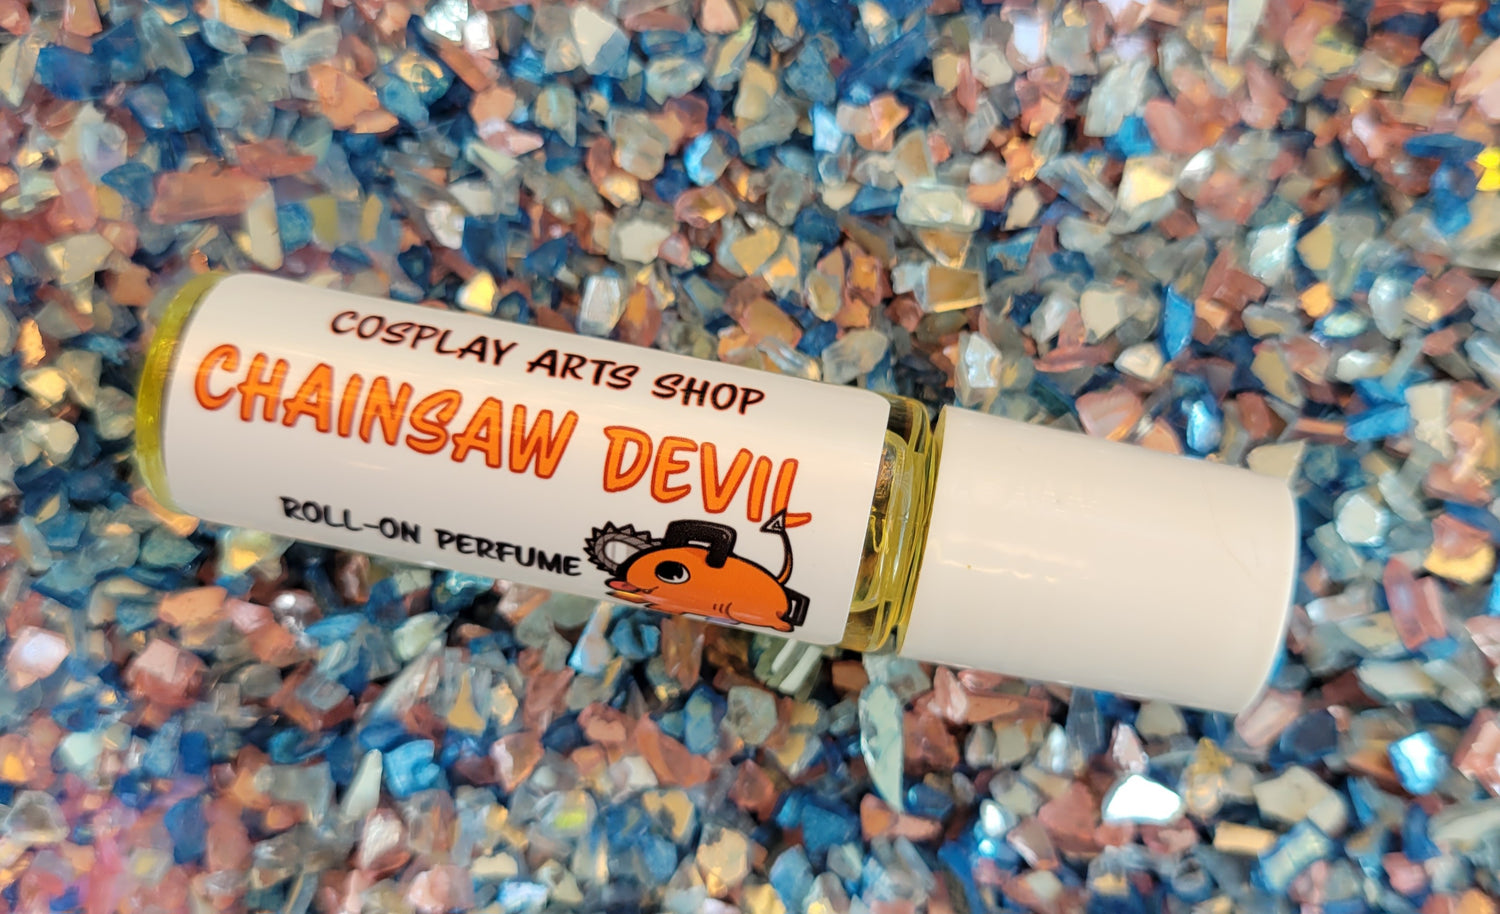 Chainsaw Devil Roll On - Cosplay Arts Shop